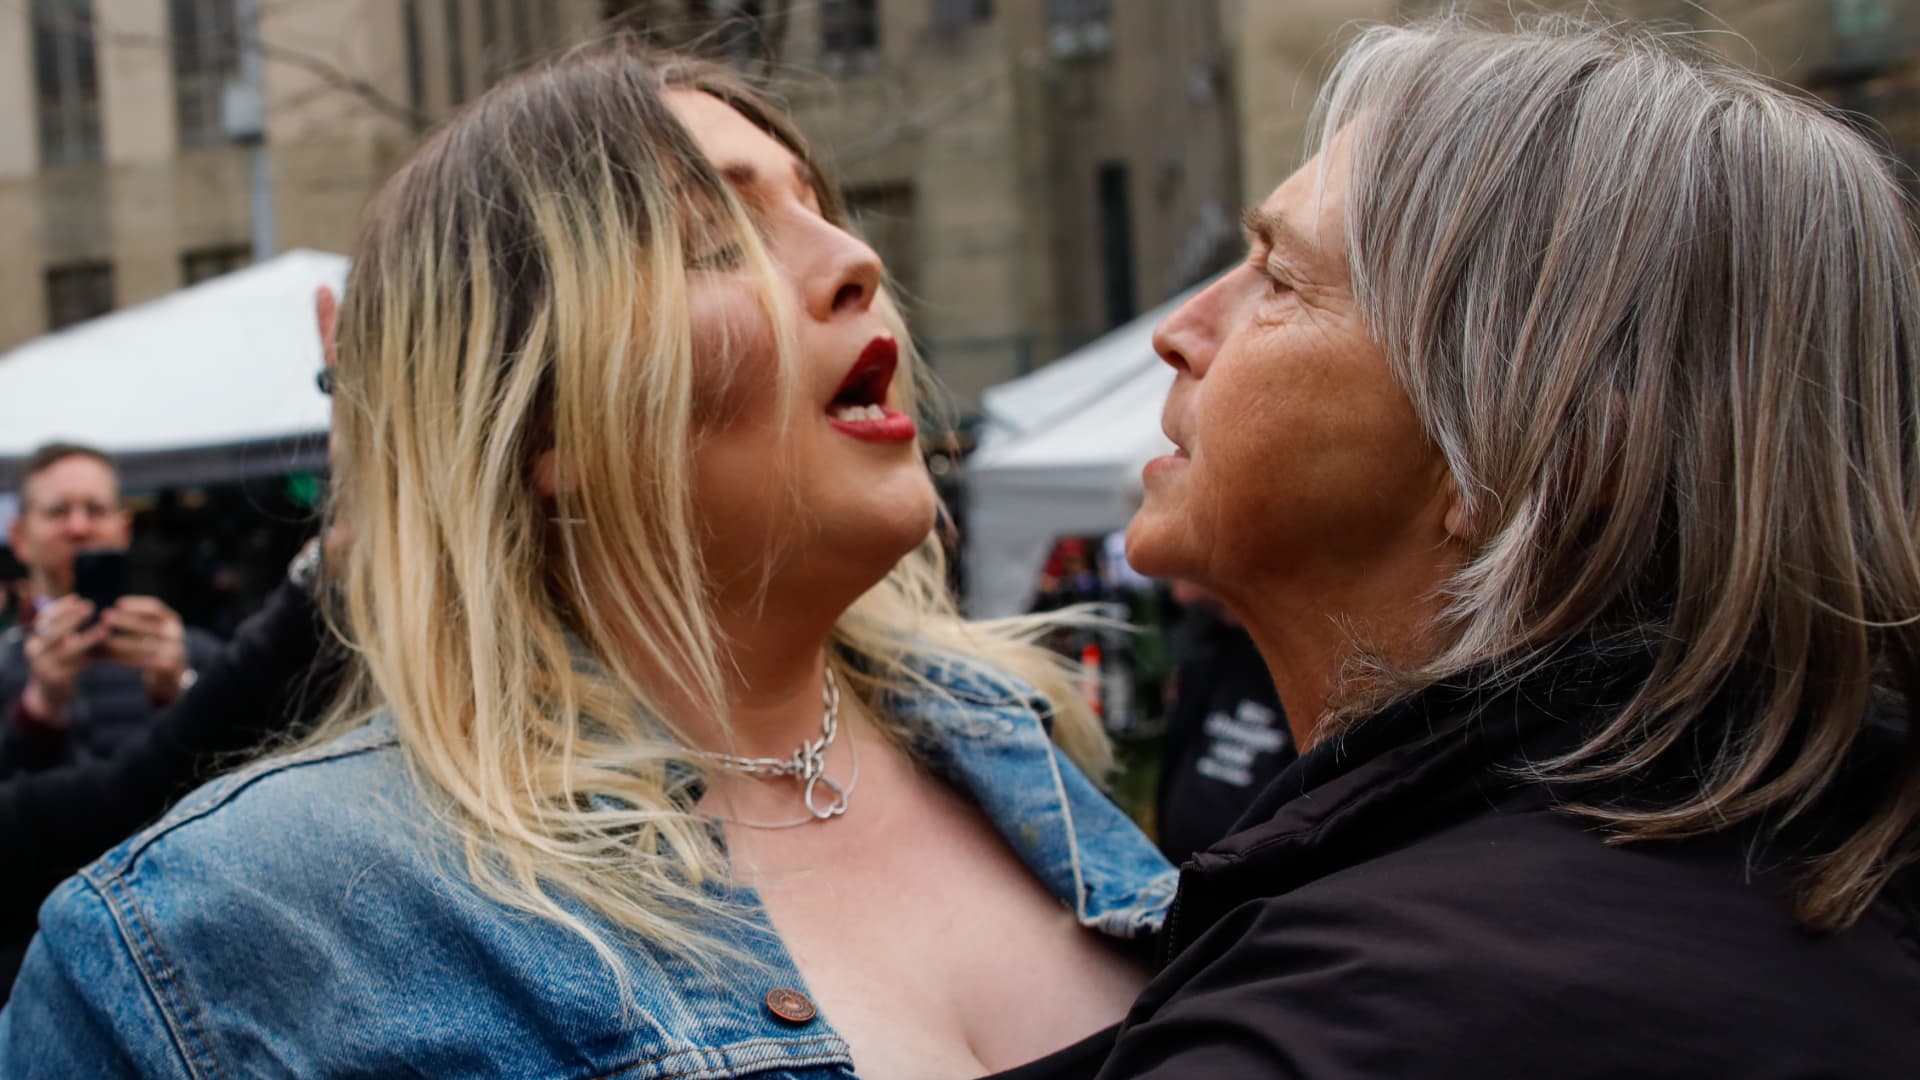 A Trump supporter (L) argues with an Anti-Trump protester after she removed an anti-Trump banner from her outside the Manhattan Criminal Courthouse on April 04, 2023 in New York City. 